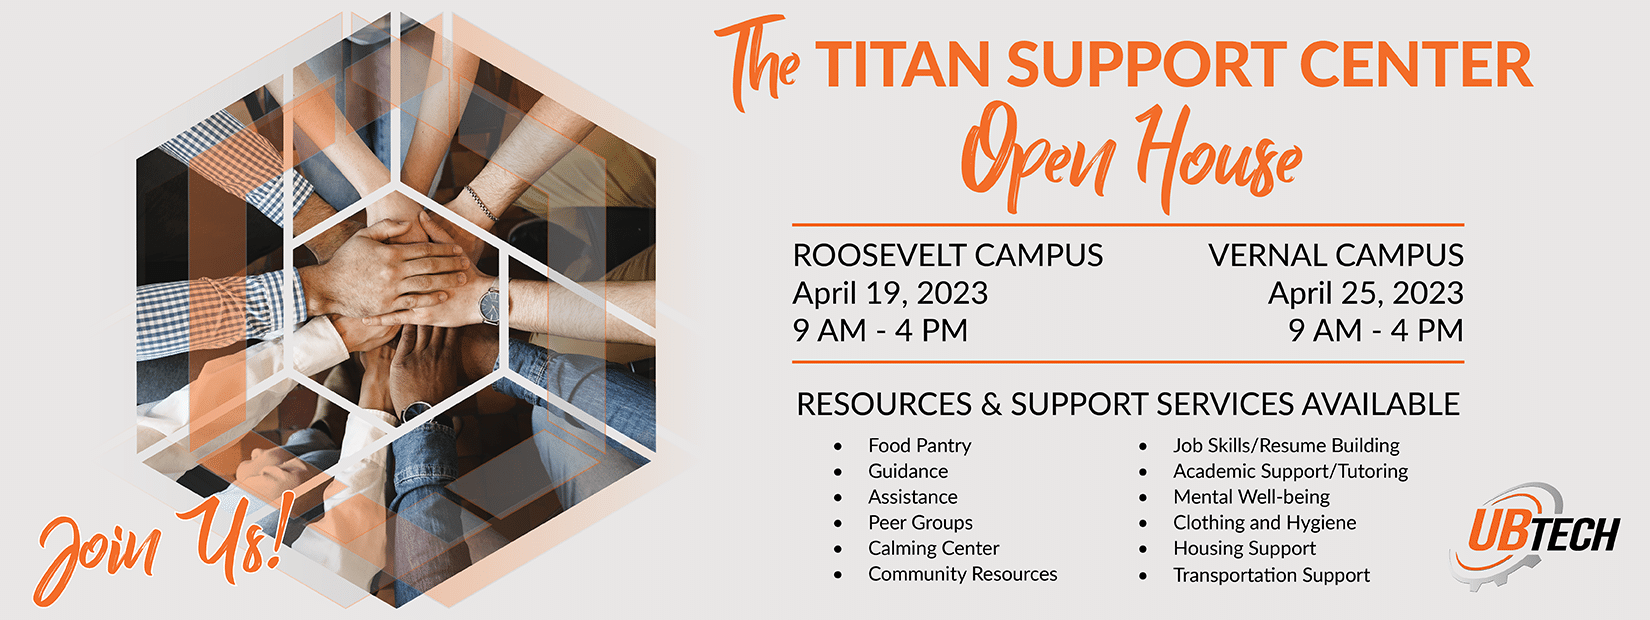 The Titan Support Center Open House! Roosevelt Campus, April 19th from 9am-4pm; Vernal Campus, April 25th, from 9am to 4pm.